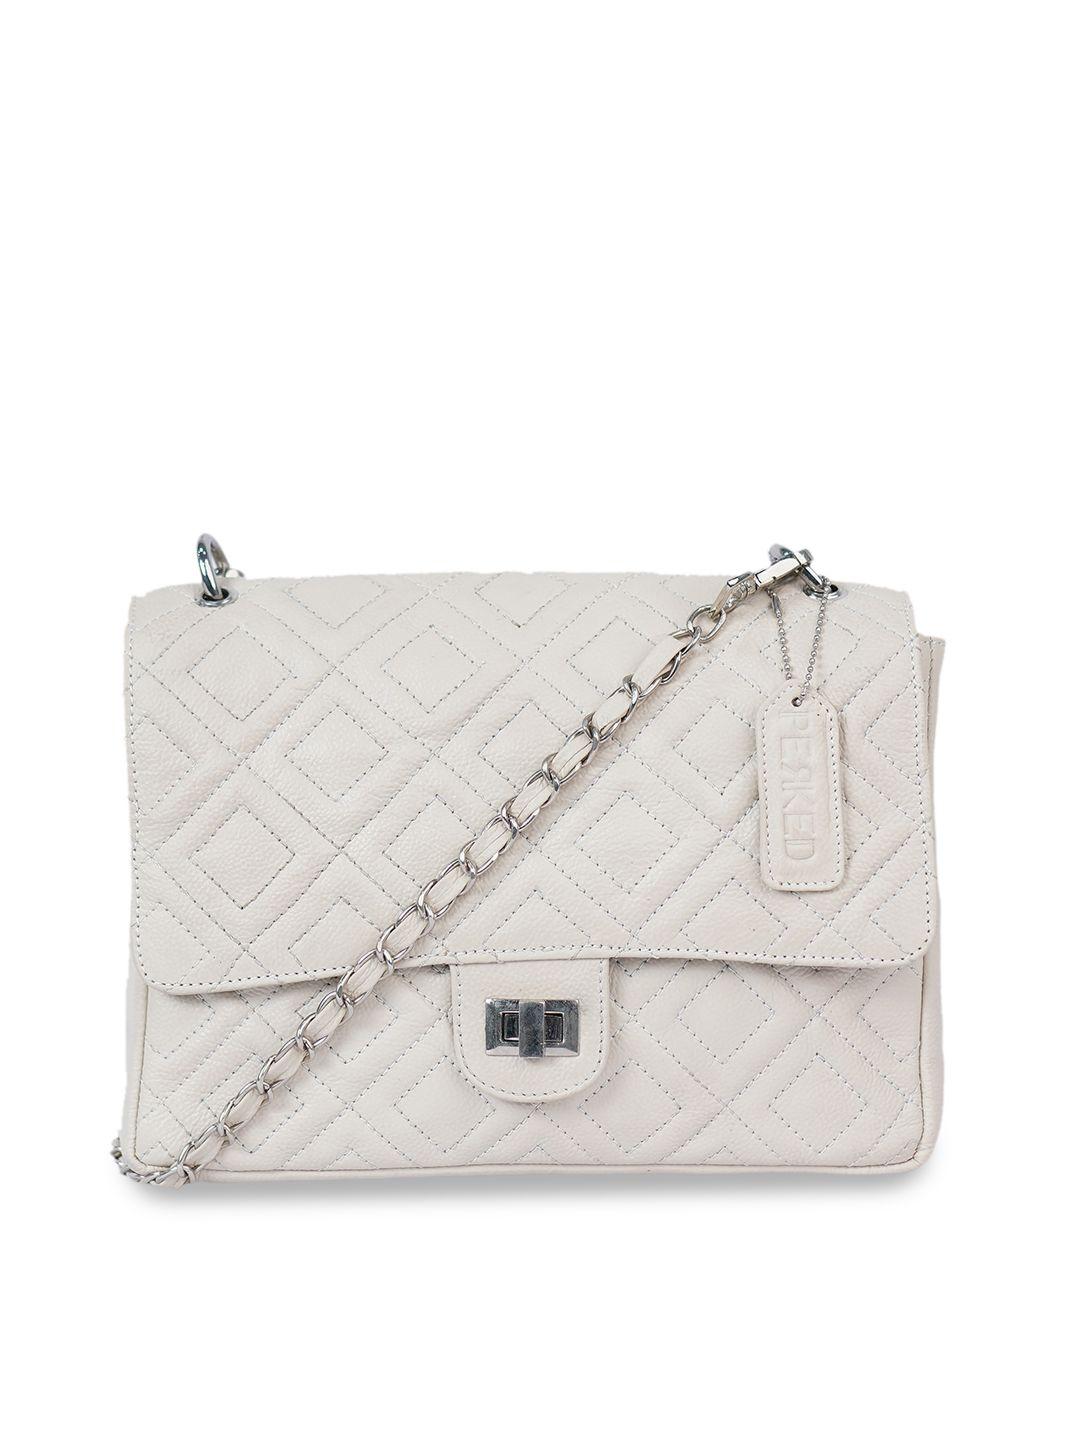 perked white textured leather structured sling bag with quilted